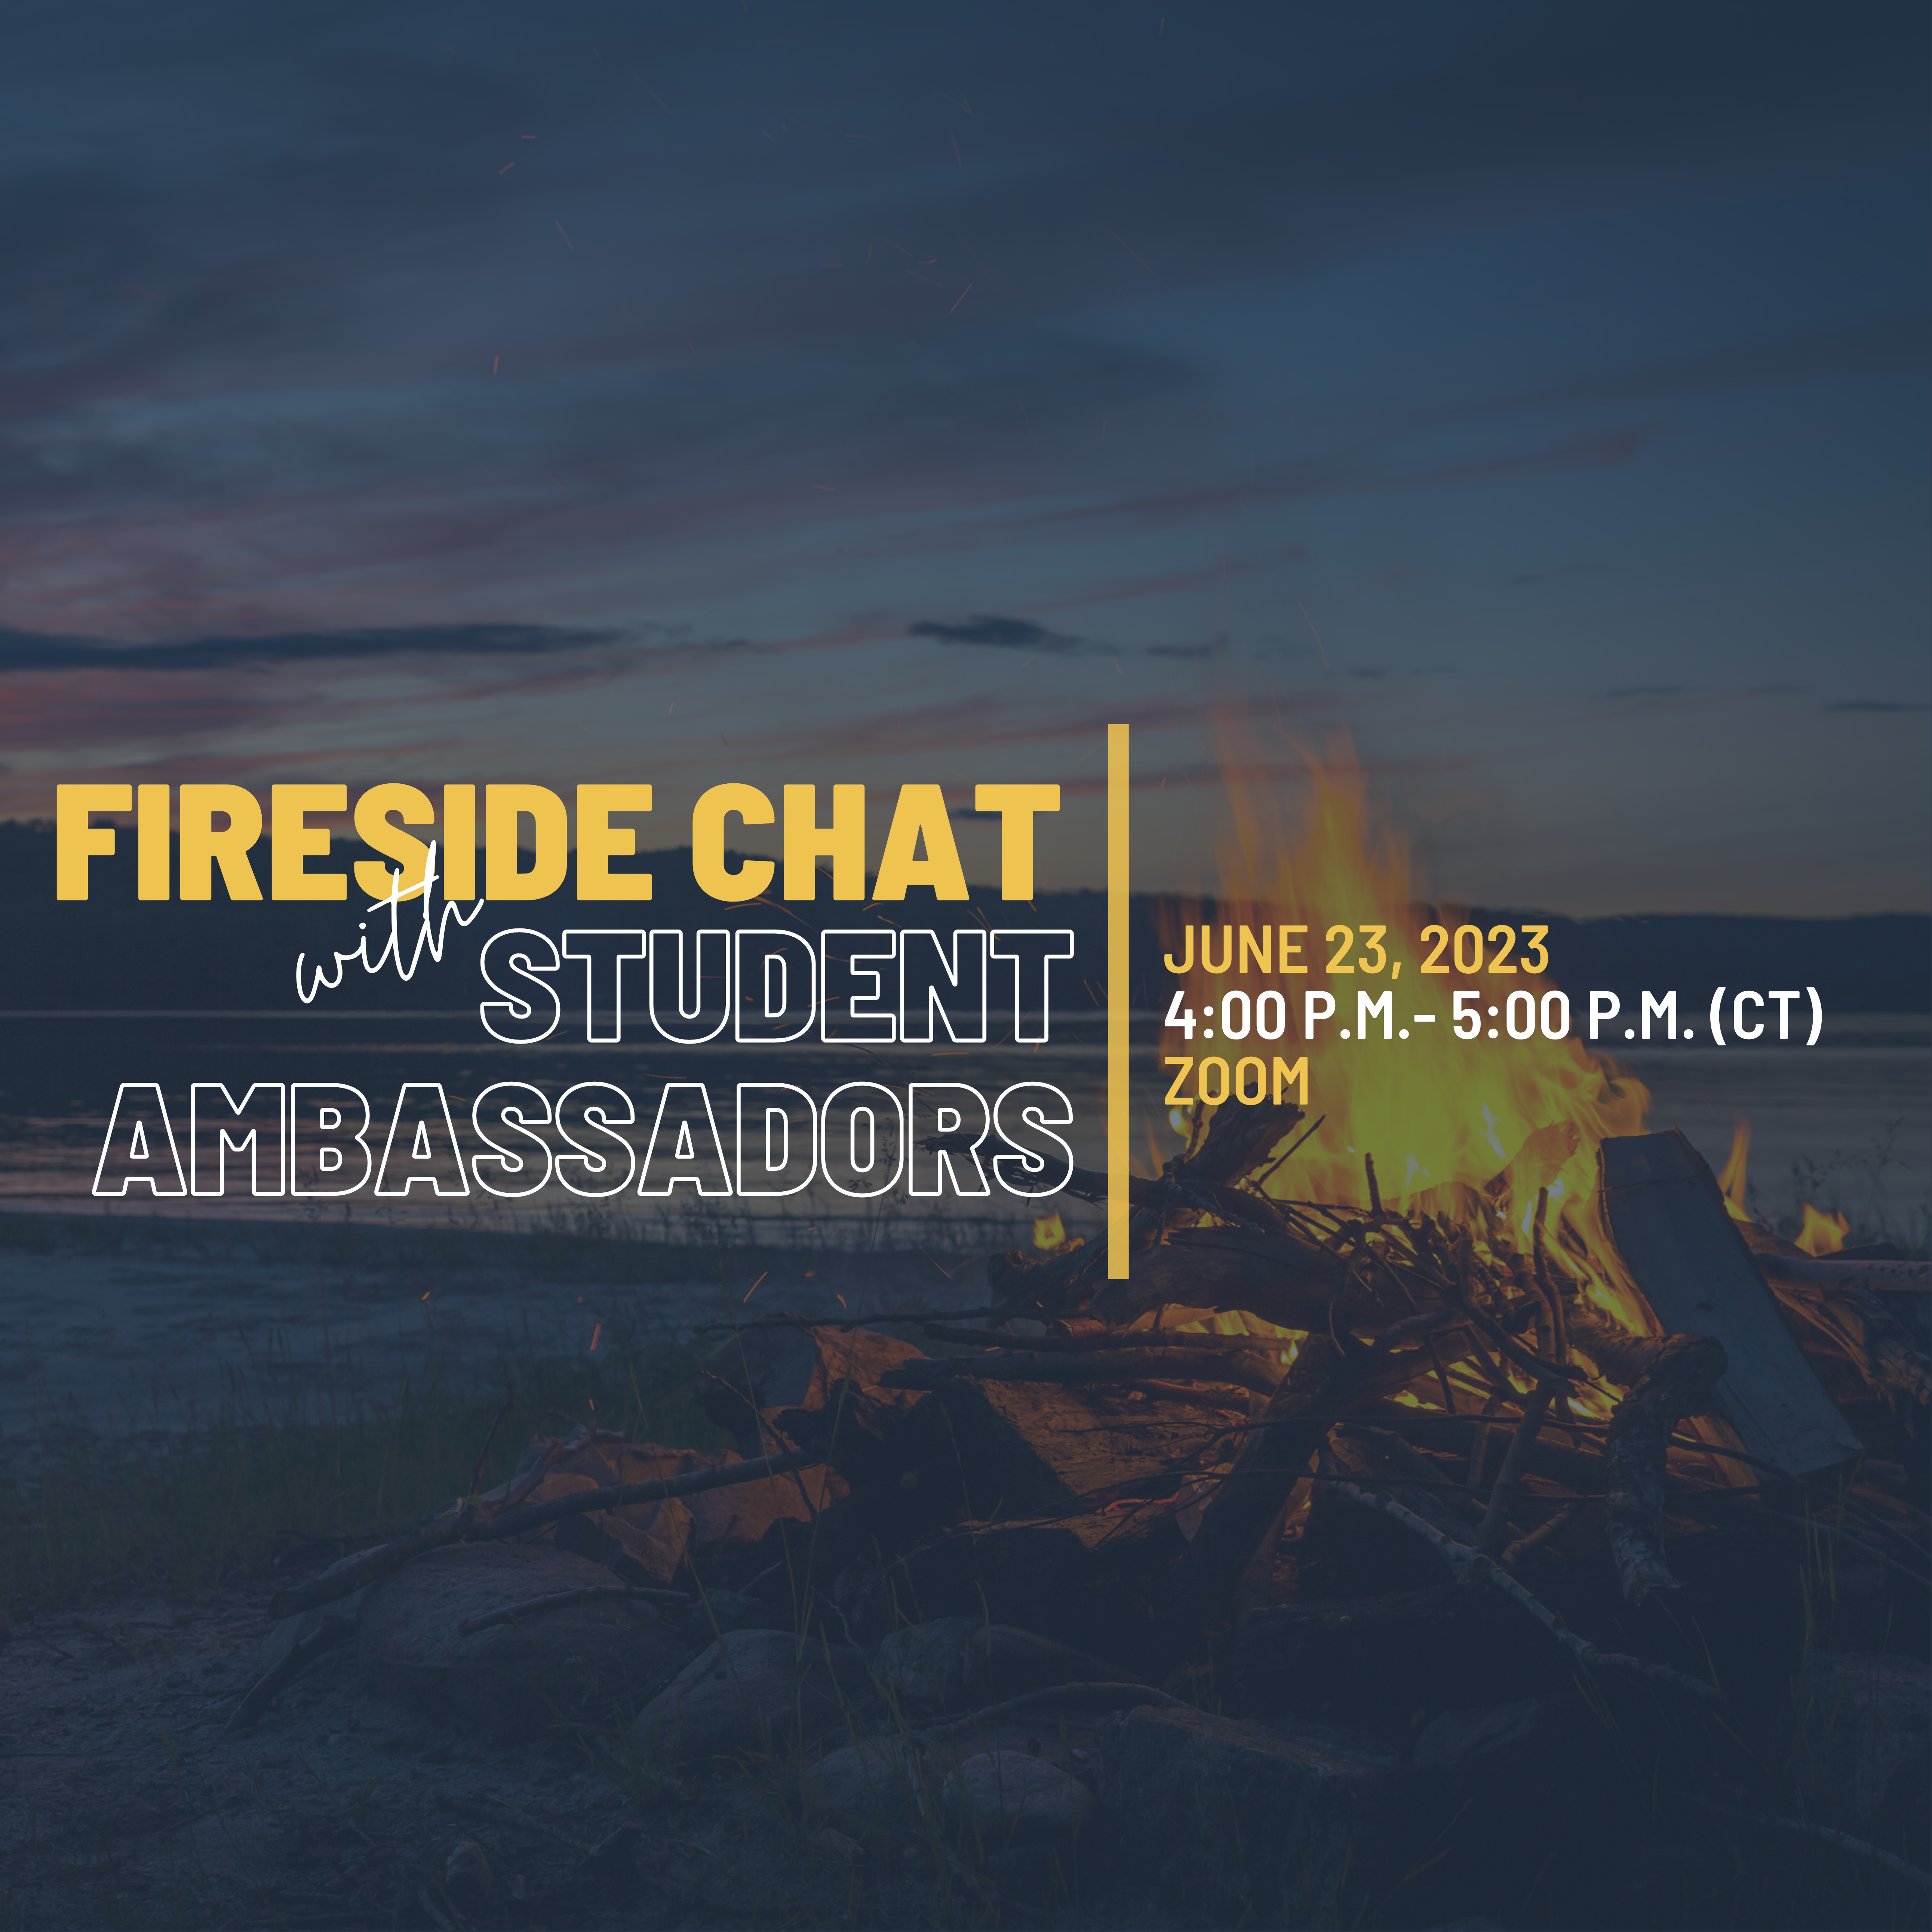 Fireside Chat with Student Ambassadors and Committed Students